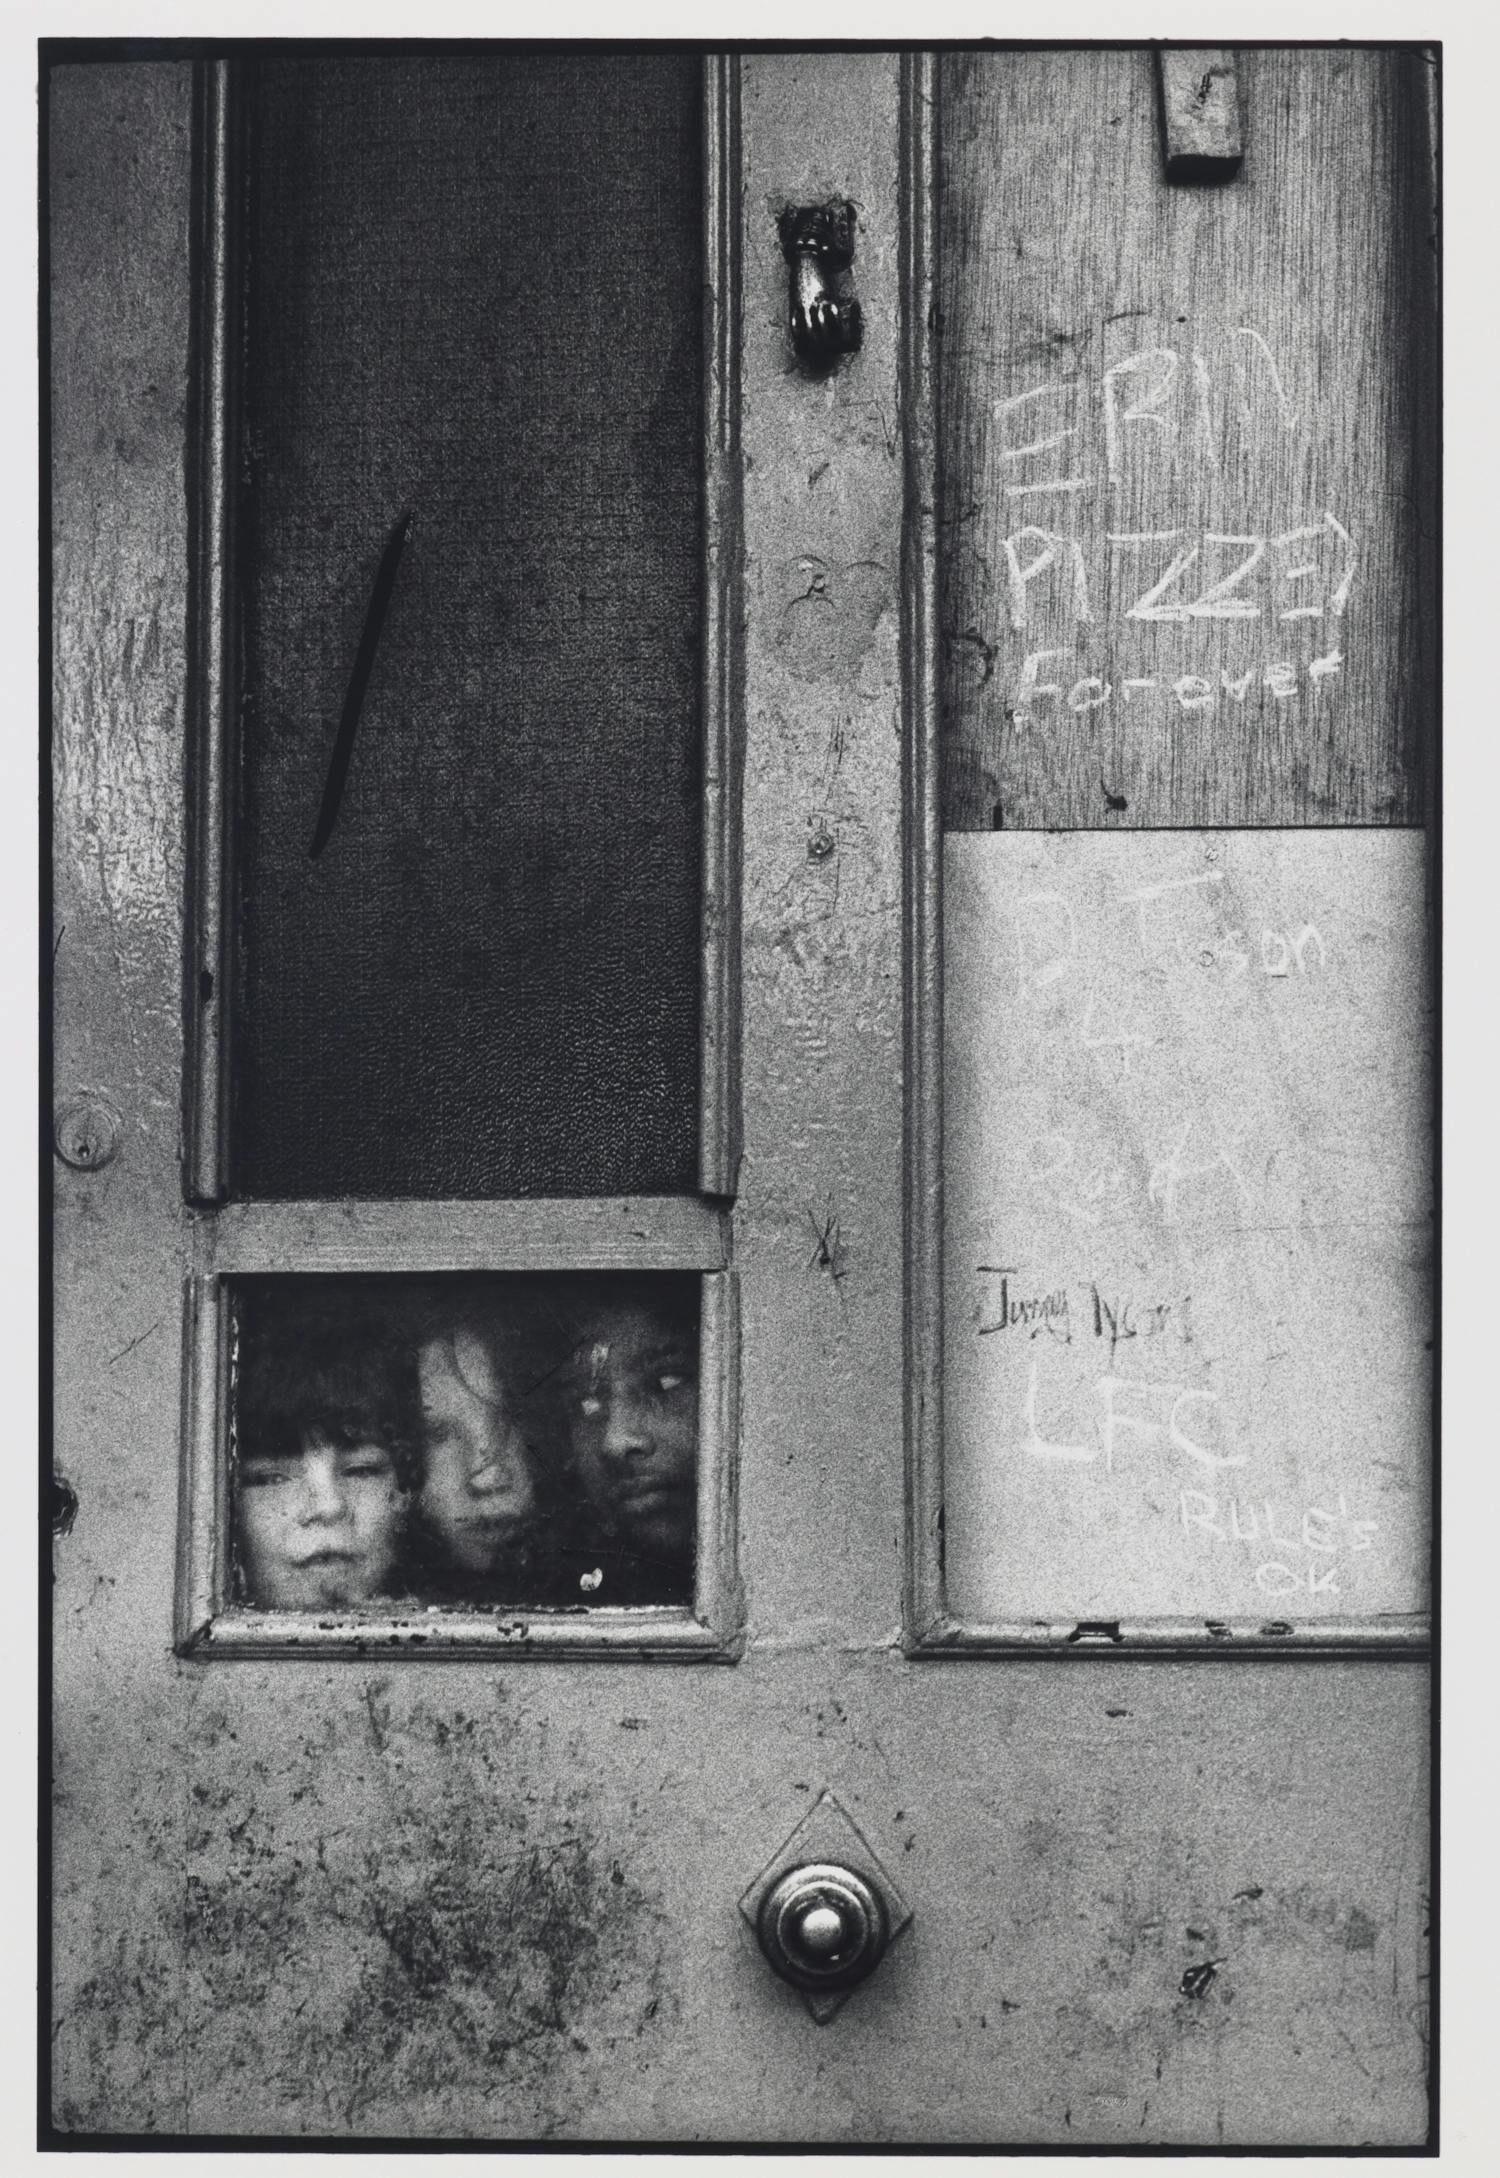 [ID: The black and white photograph shows an old door covered with graffiti. Three children are looking through a small window embedded in the door. End of ID]